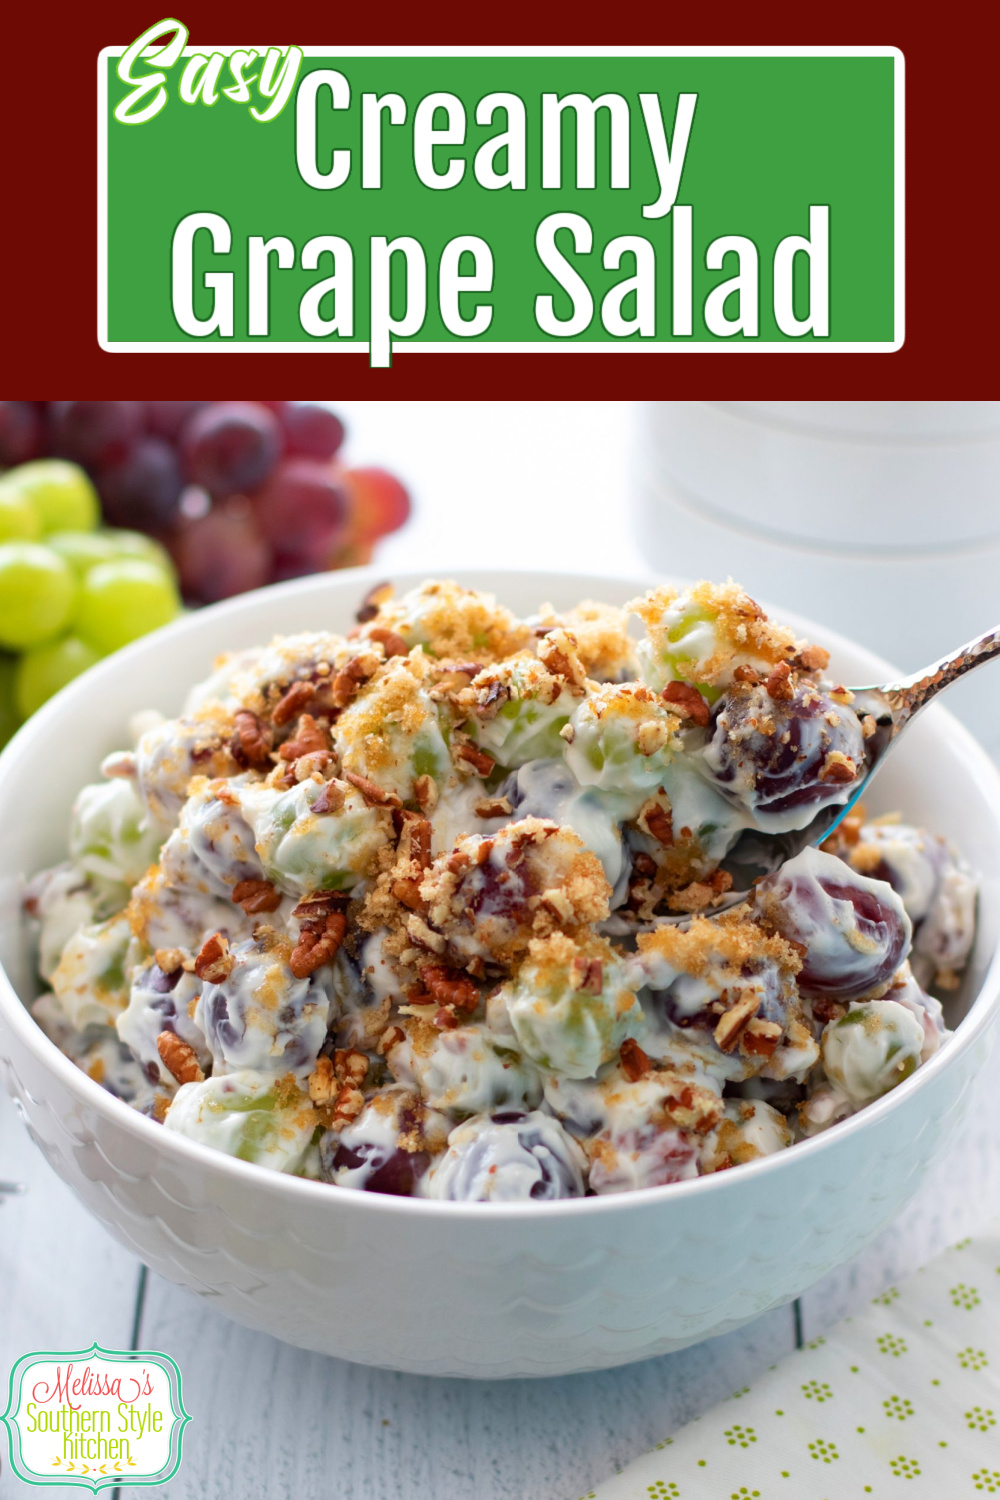 This vintage creamy Grape Salad Recipe takes minutes to make and can be served as a delicious last minute side dish or as an easy dessert #grapesalad #easyfruitsalad #grapesaladrecipe #grapes #easydessertrecipes #bestgrapesaladrecipe #creamygrapesalad via @melissasssk